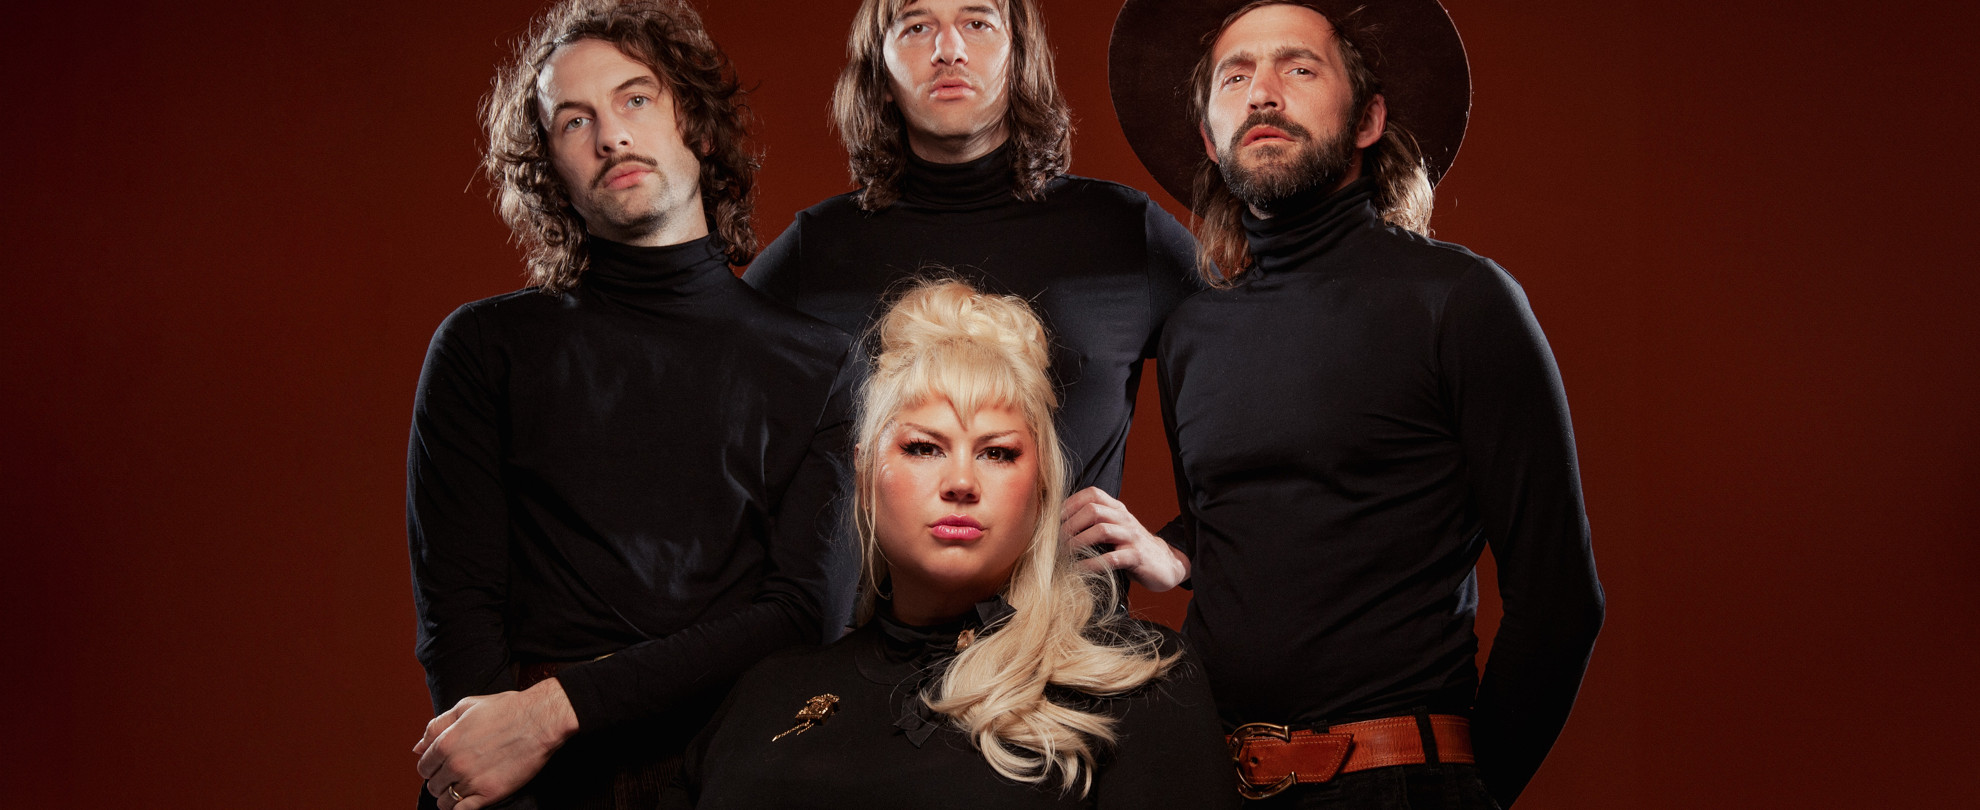 Exclusive Premiere: Shannon & The Clams’ Symbolic New Single “Bean Fields”